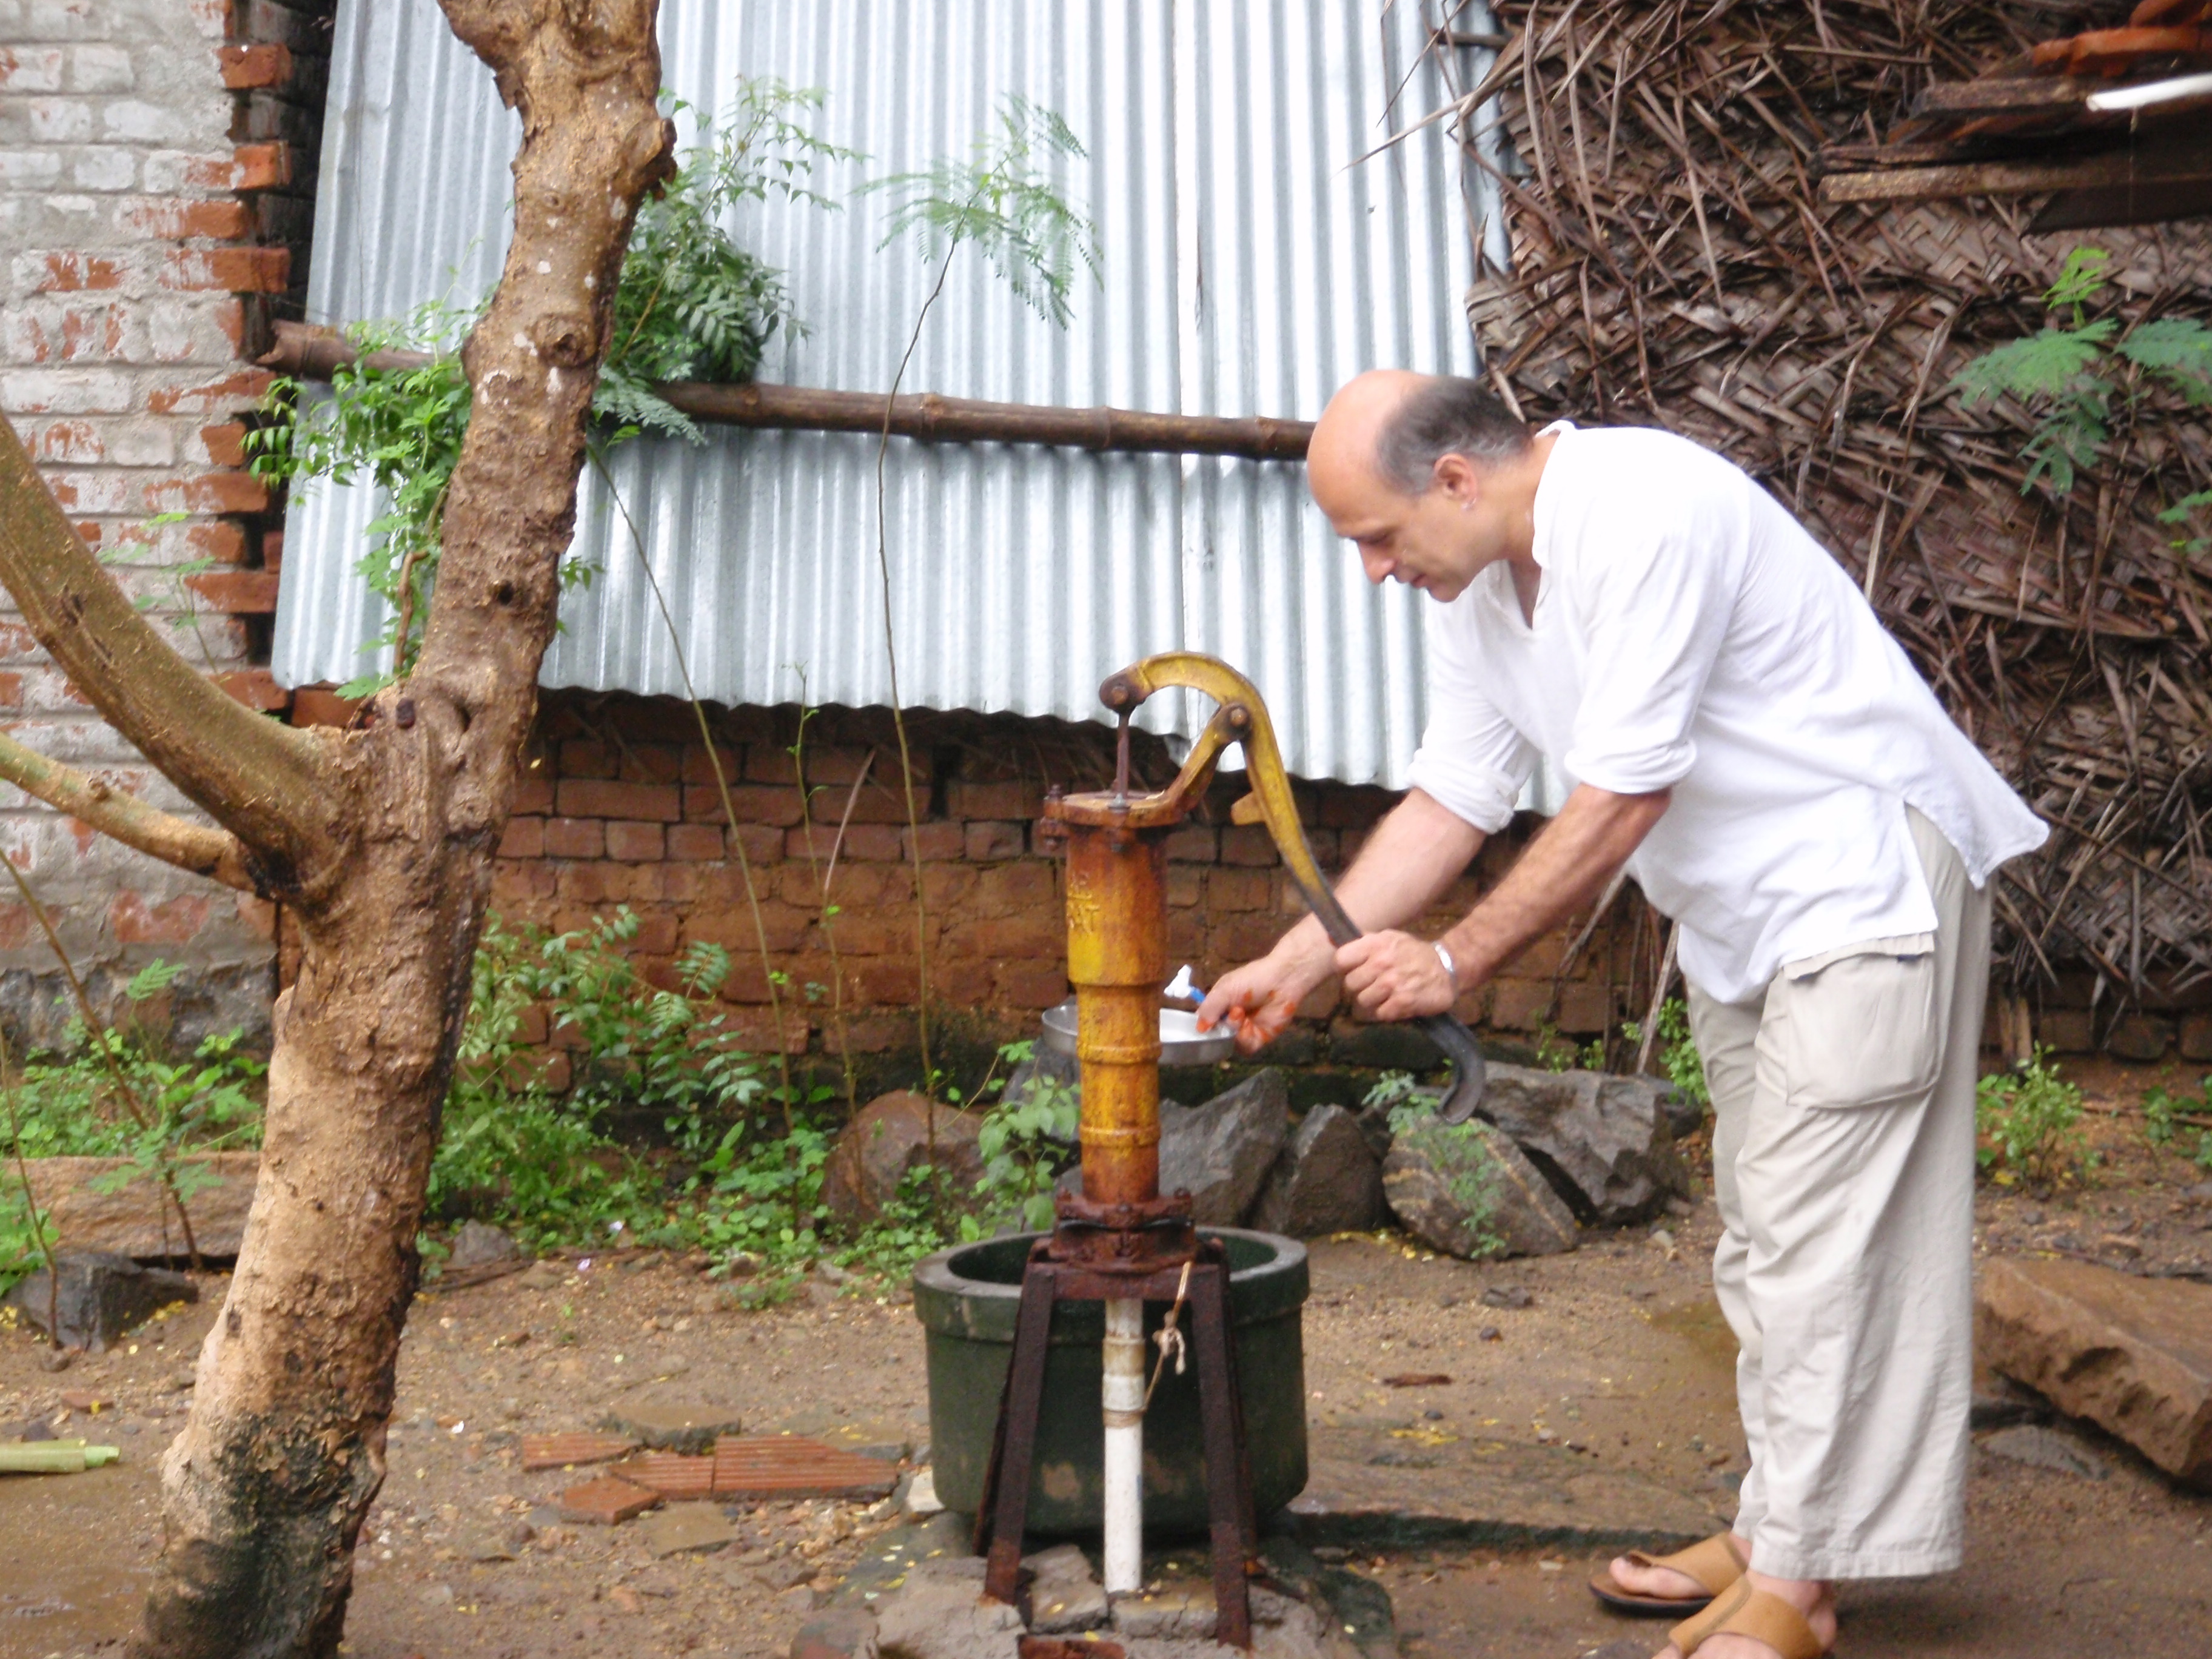 File:Hand water pump in India (3382861084).jpg - Wikimedia Commons